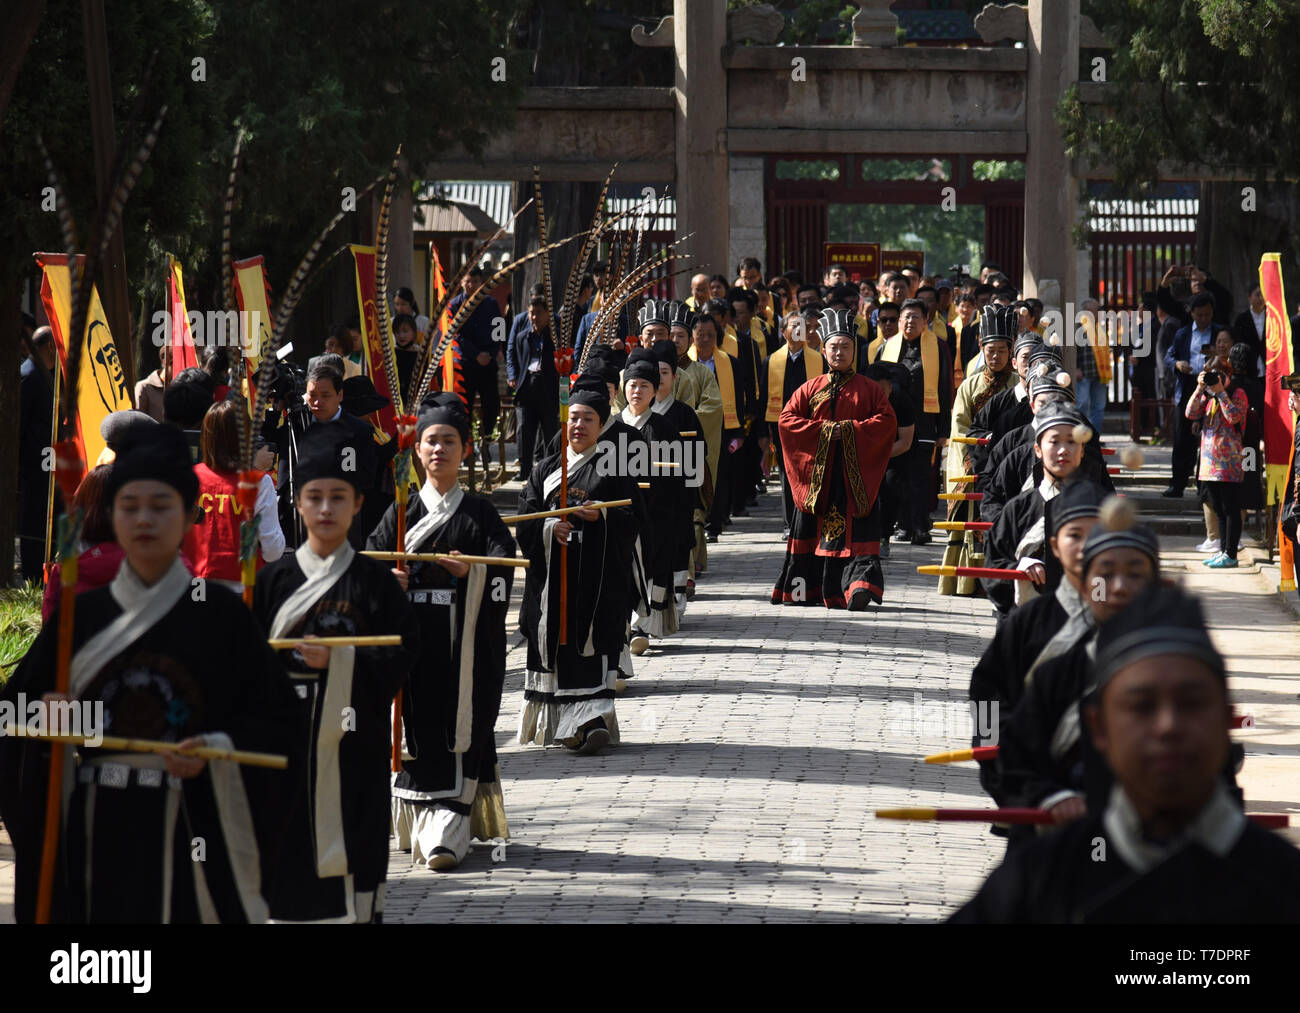 (190506) -- ZOUCHENG, May 6, 2019 (Xinhua) -- People perform during a commemoration ceremony of ancient China's philosopher Mencius and Mencius' mother in Zoucheng City, east China's Shandong Province, May 6, 2019. Mencius (372-289 BC), or Meng Zi, was a pupil of Confucius' grandson, and traveled his life teaching Confucianism. (Xinhua/Wang Kai) Stock Photo